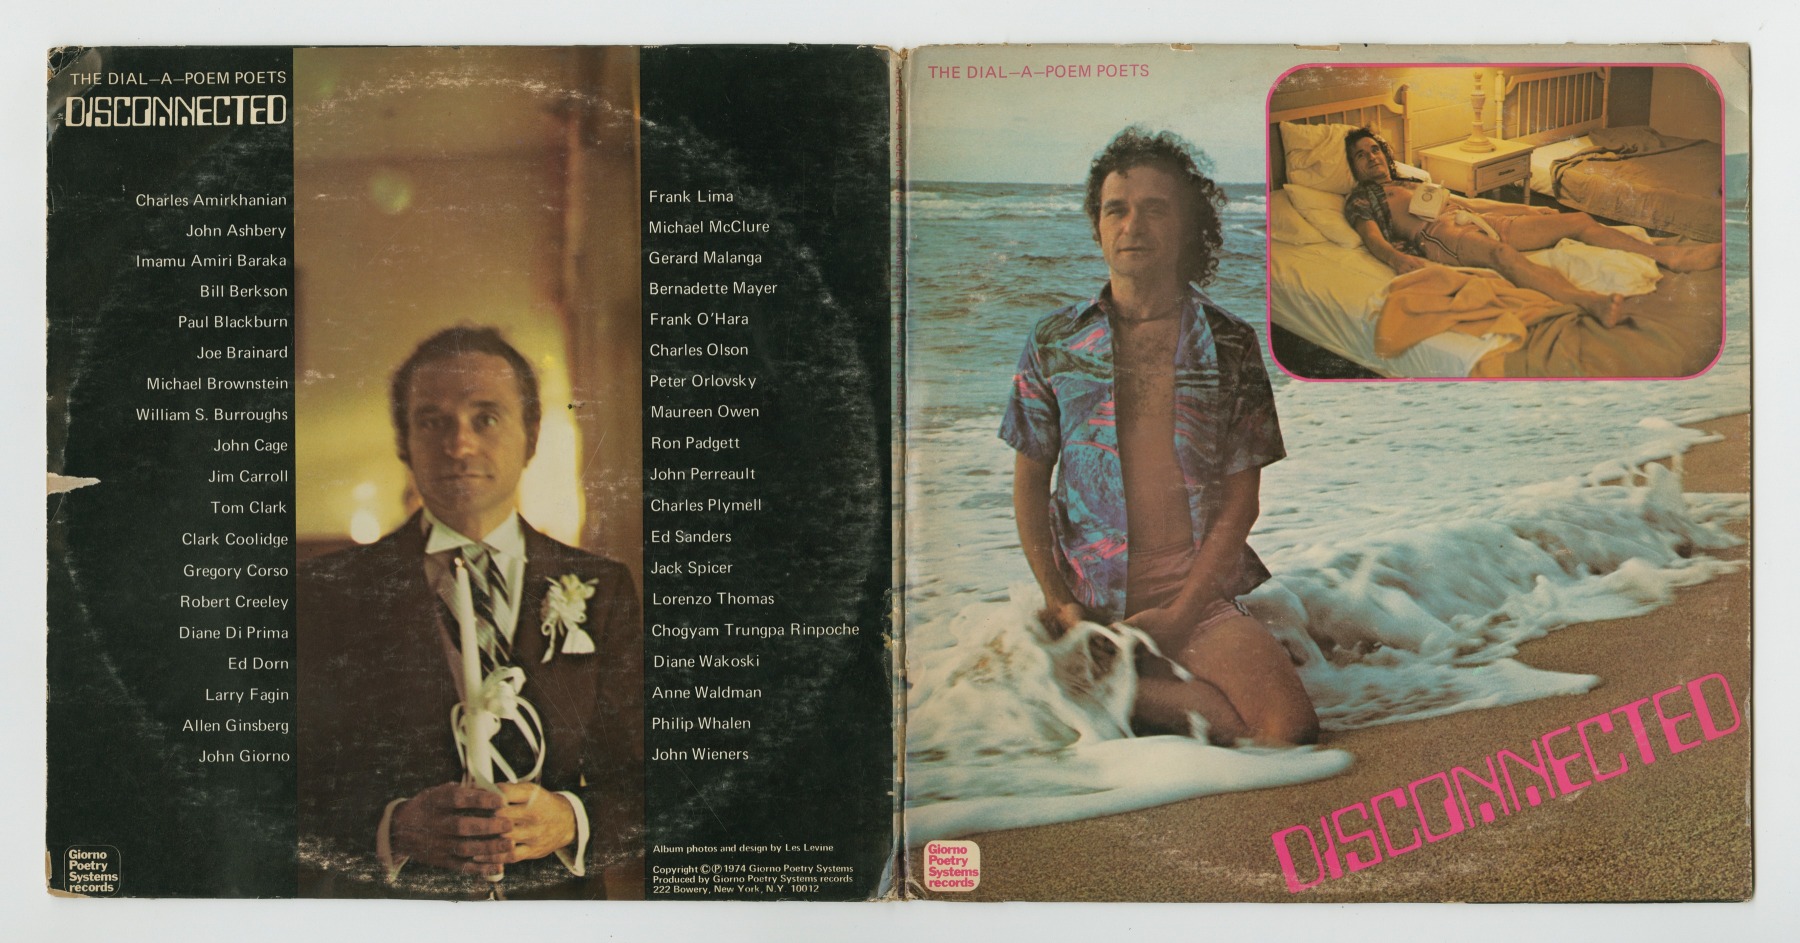 The Dial-A-Poem Poets: Disconnected (1974), front and back covers